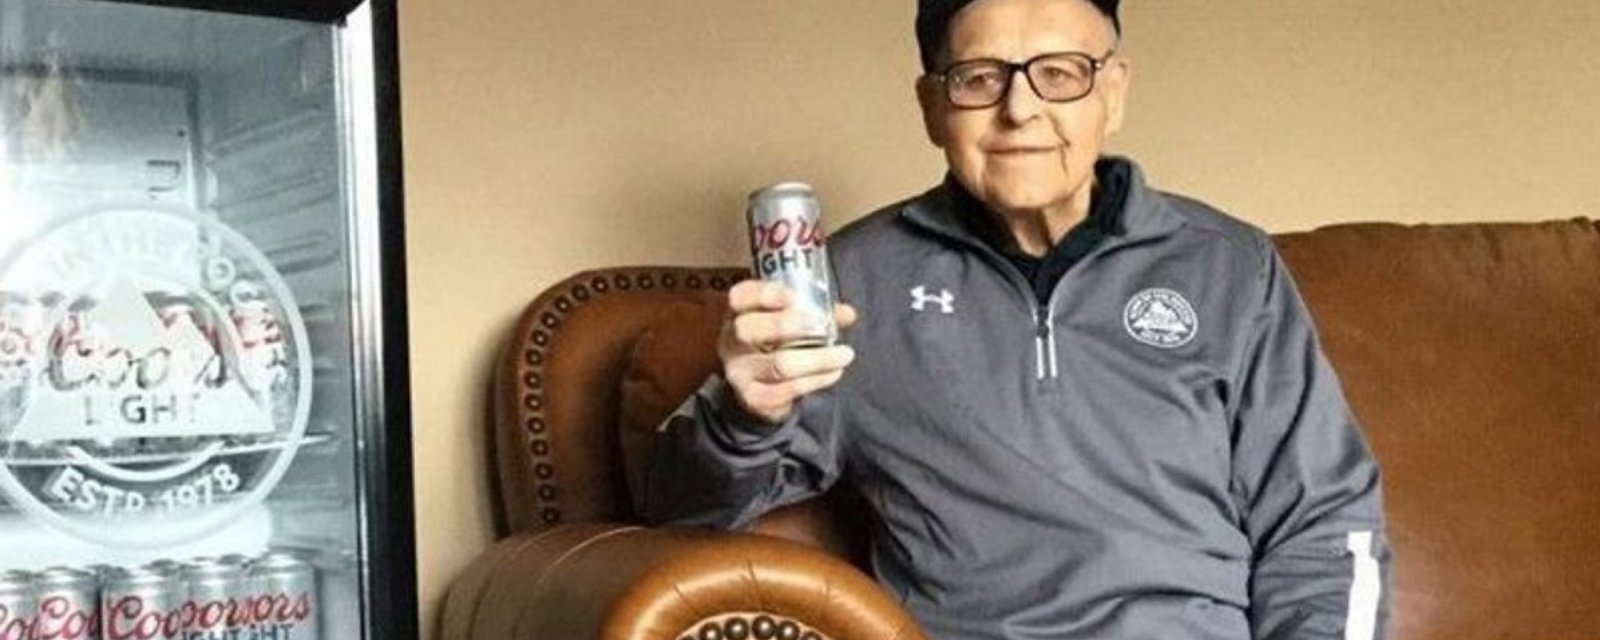 101 year old man says his secret to long life is Coors Light!